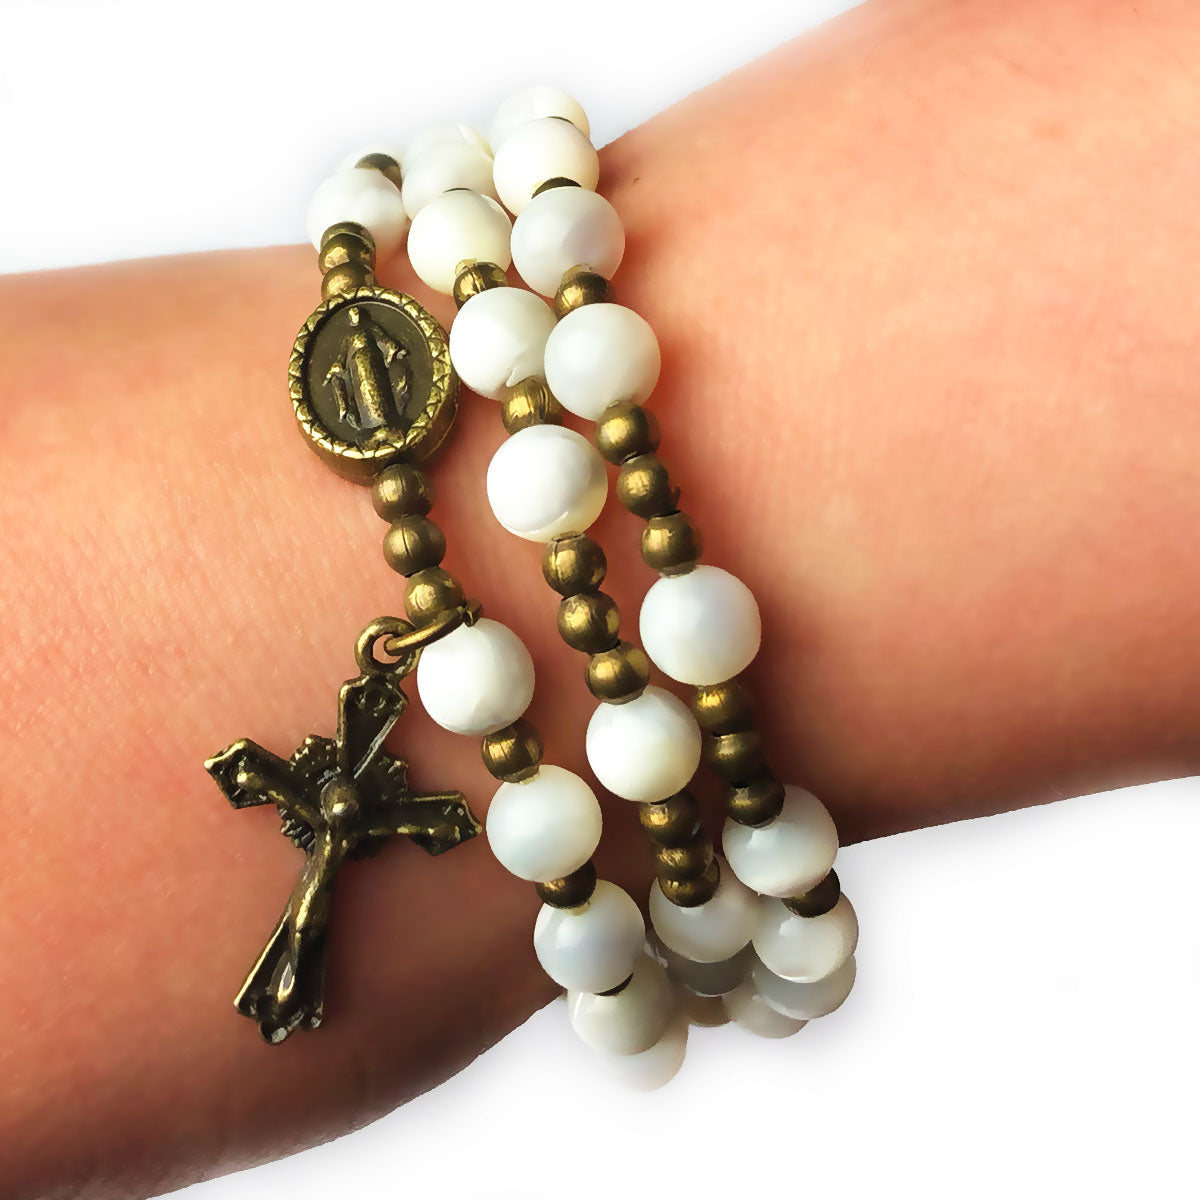 Mother of Pearl Stone Full 5-Decade Catholic Rosary Bracelet by Catholic Heirlooms - Confirmation - Holy Communion Gift